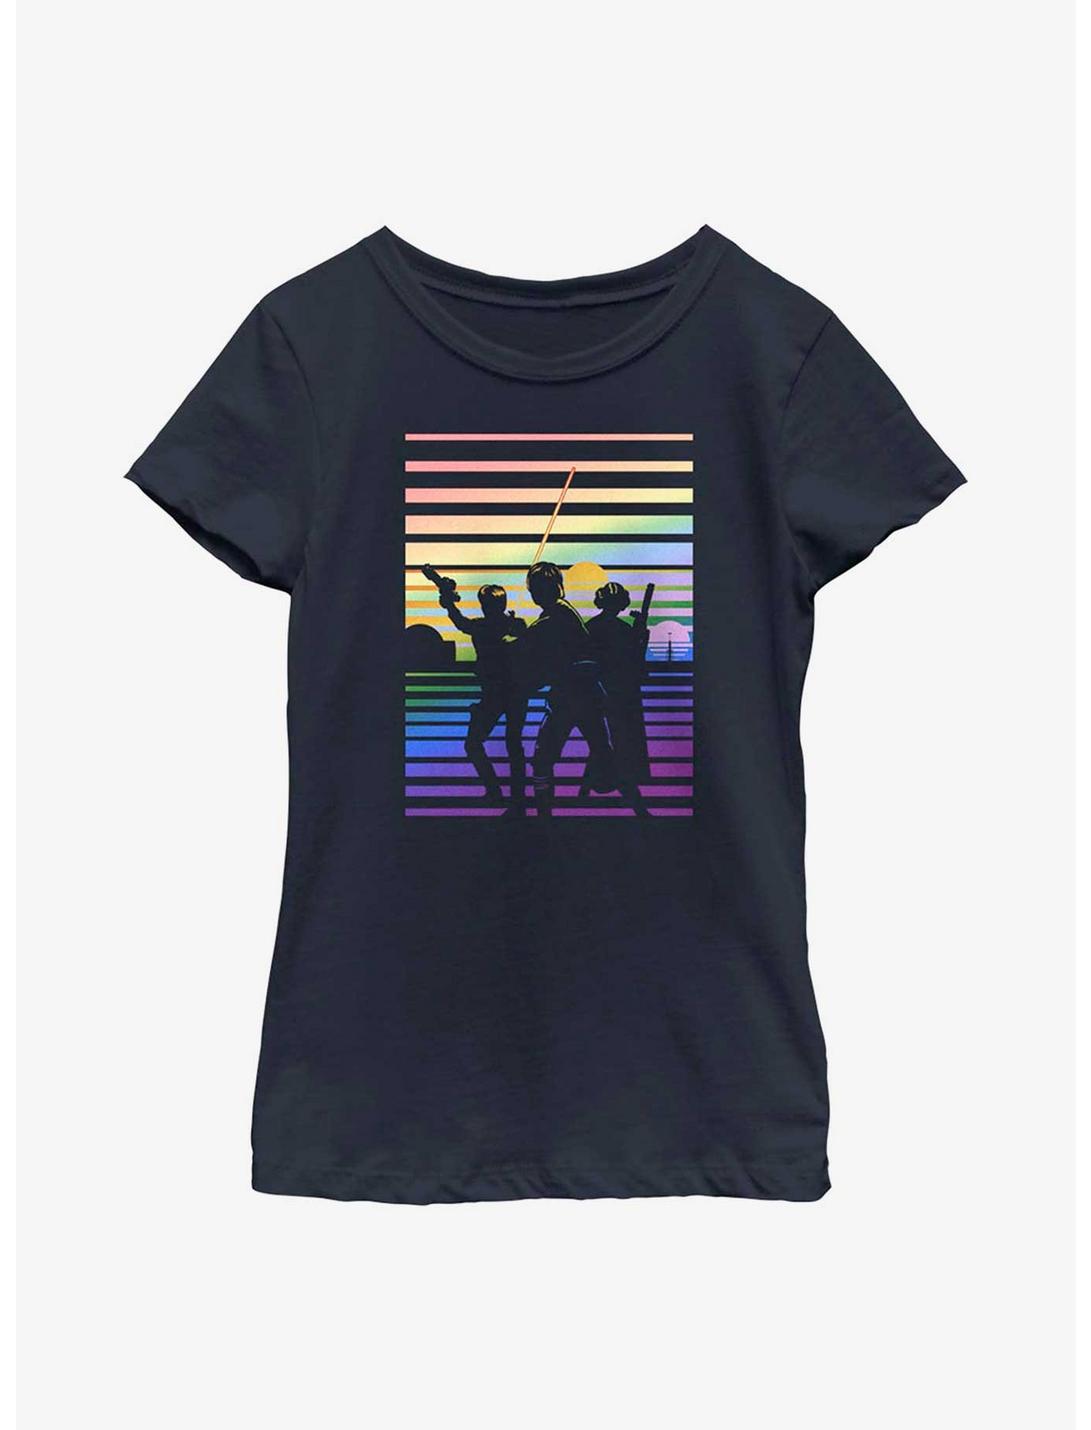 Star Wars Sunset Silhouette Youth T-Shirt, NAVY, hi-res